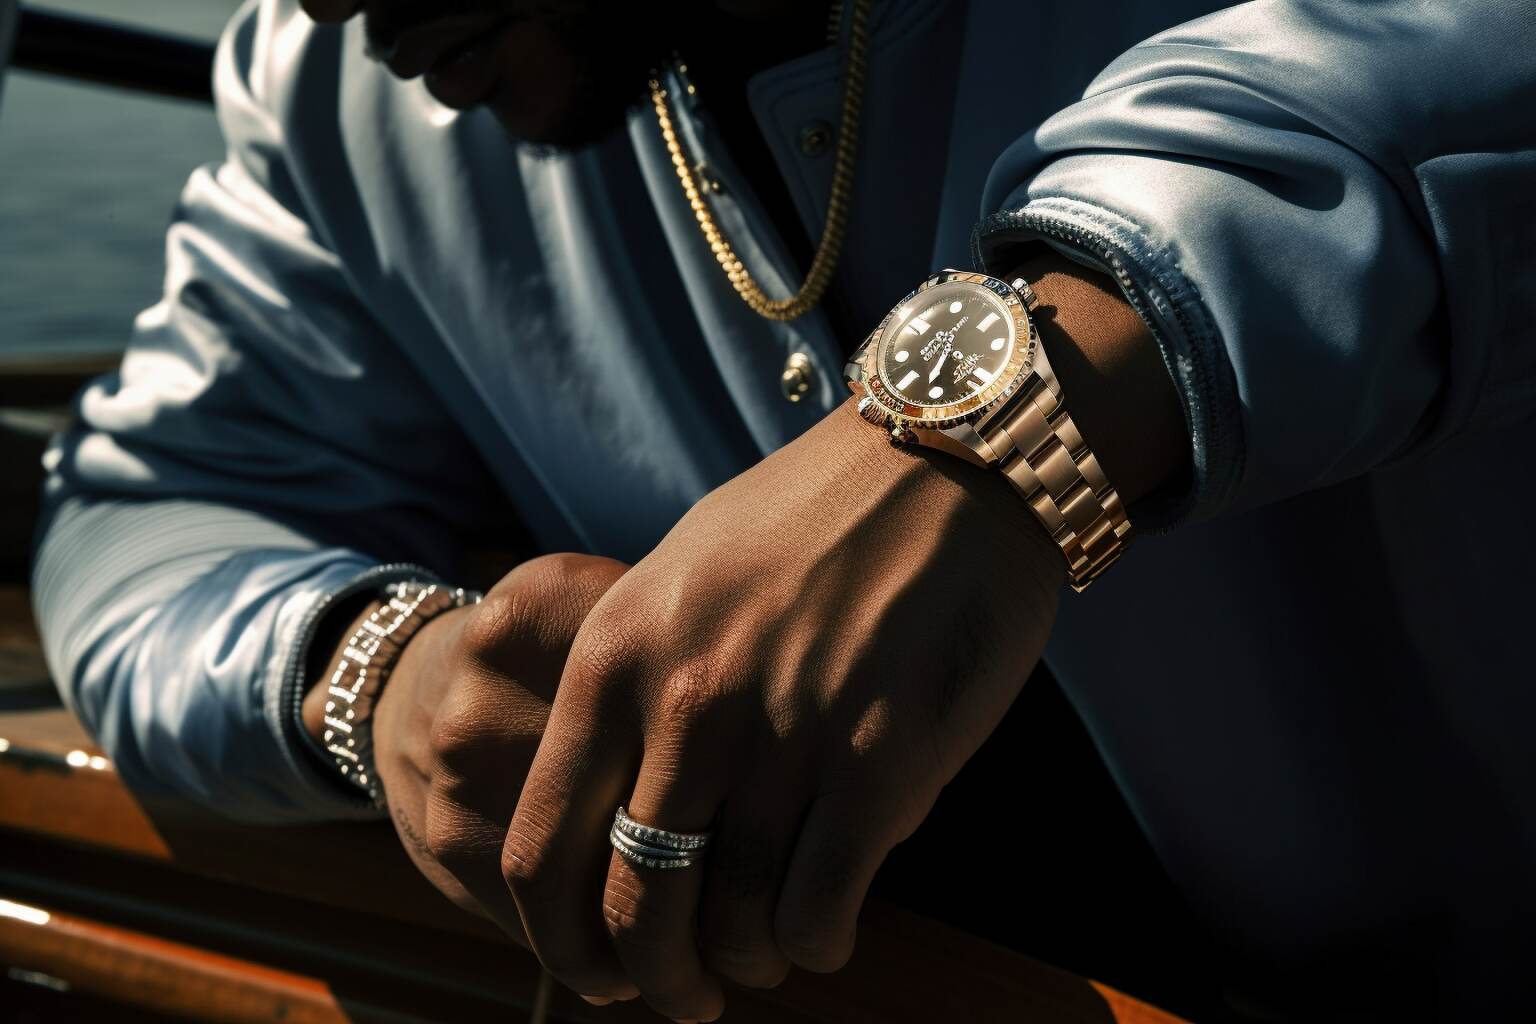 Kanye West wearing his gold Yachtmaster